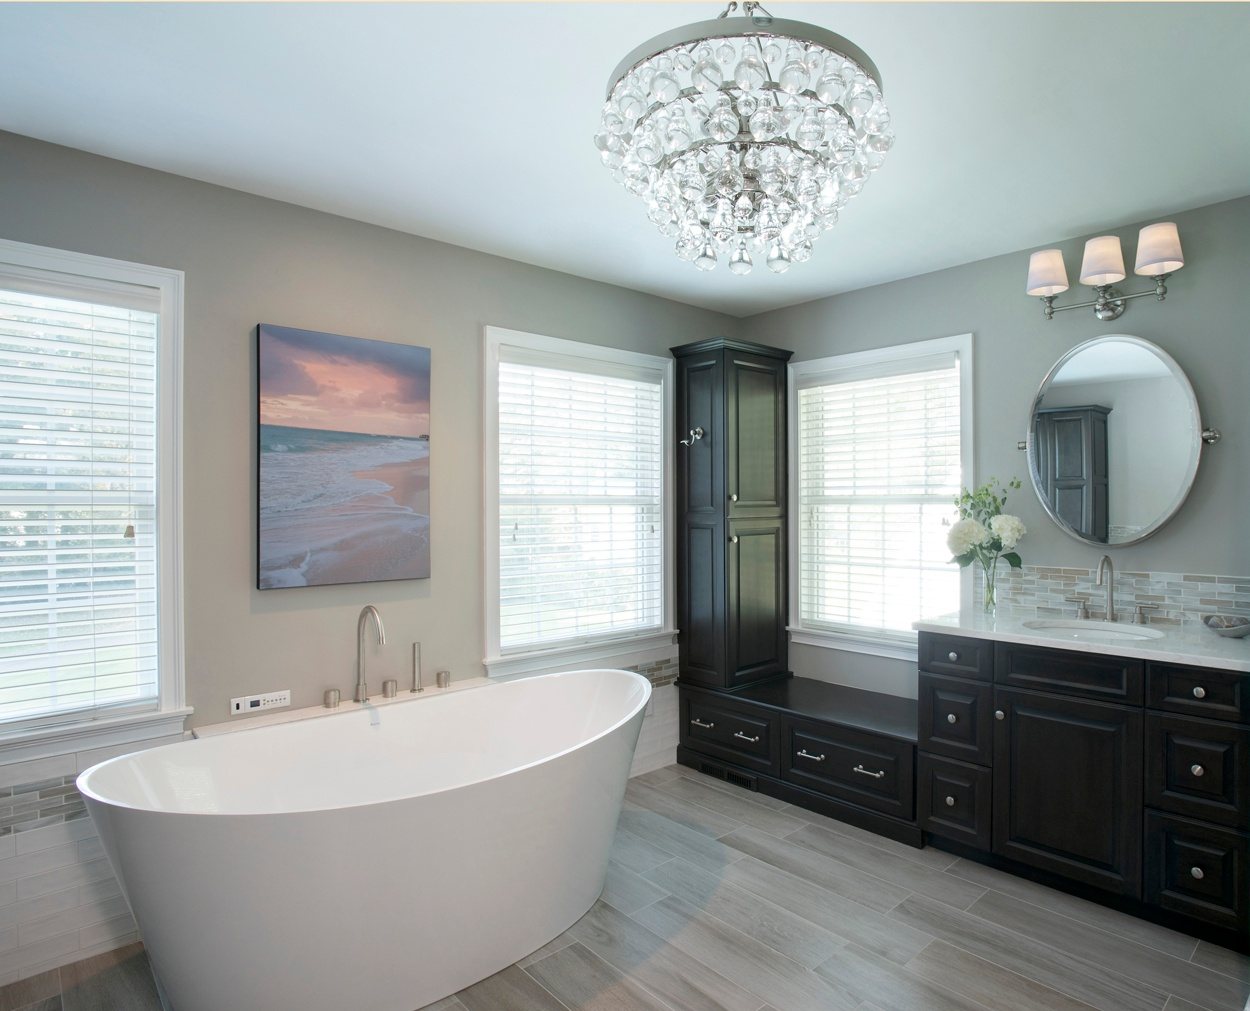 Dark cabinets and tall corner storage maximize the space in this master bath design.